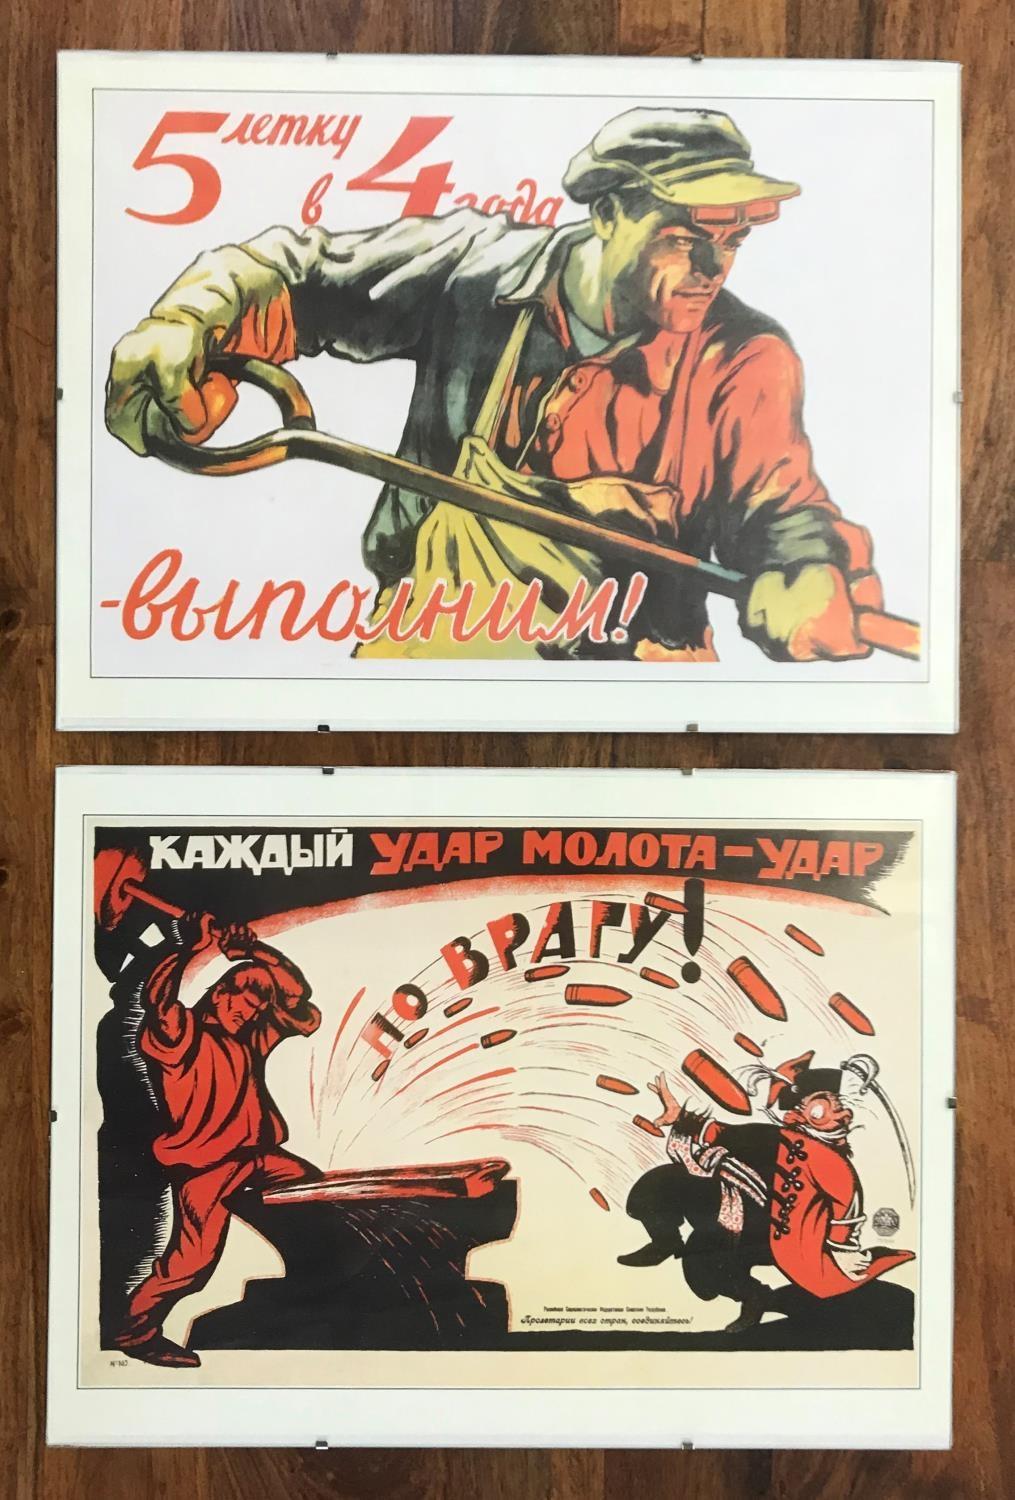 TWO REPRODUCTION RUSSIAN SOVIET ERA PROPOGANDA POSTERS one from 1920 reading 'Every hammer blow is a